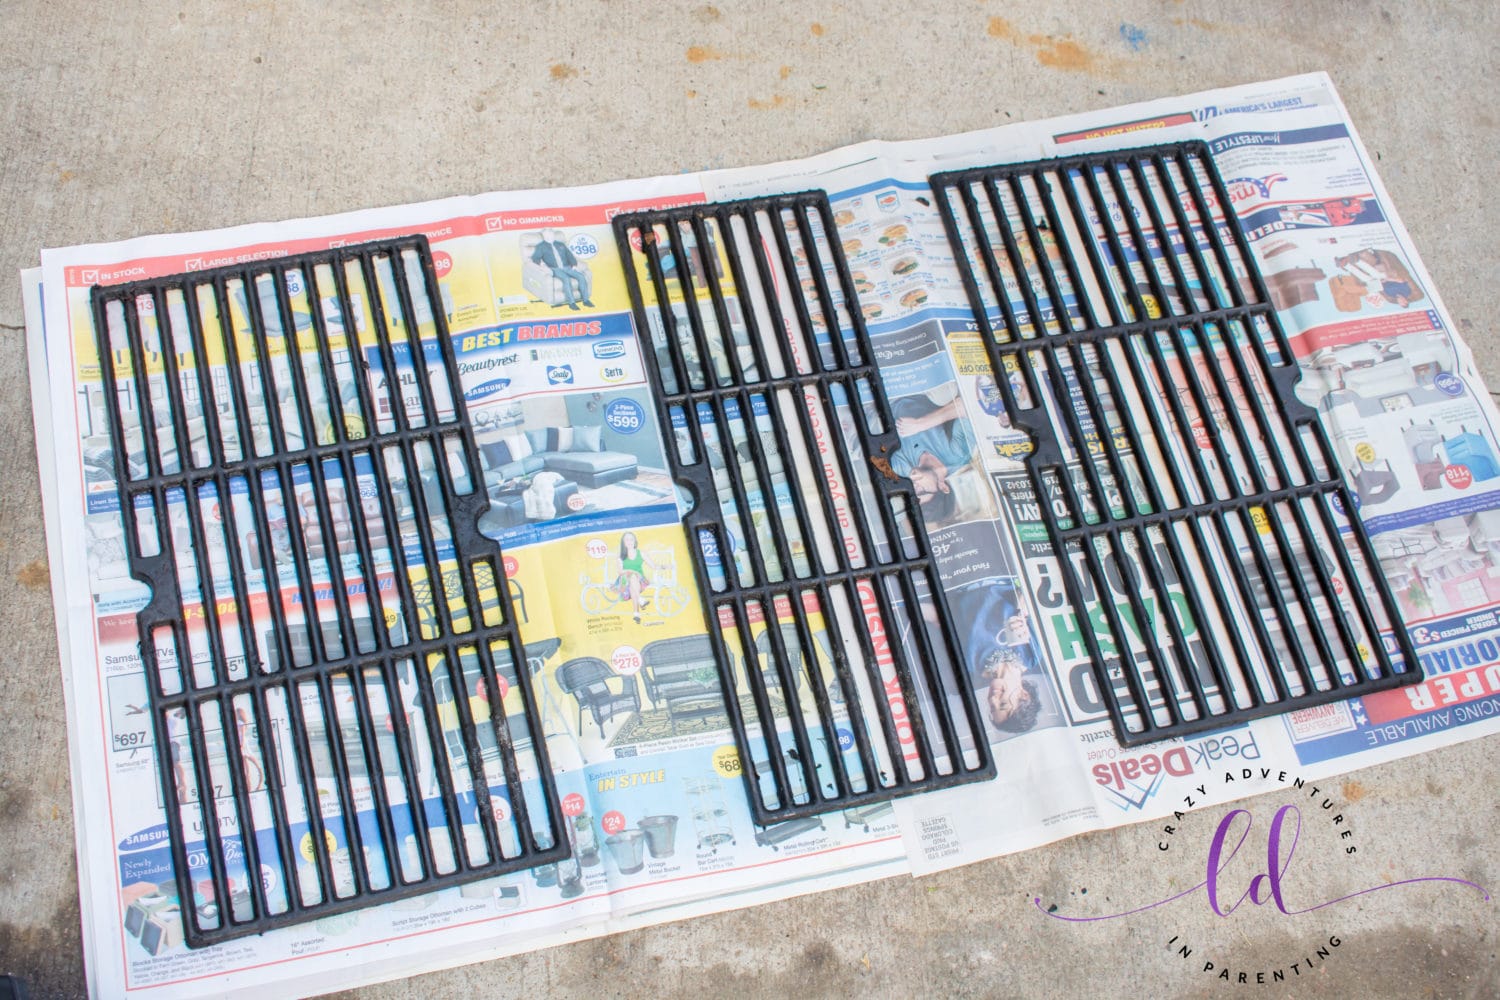 Prepping Grates on Newspaper for Goo Gone Grill and Grate Cleaner